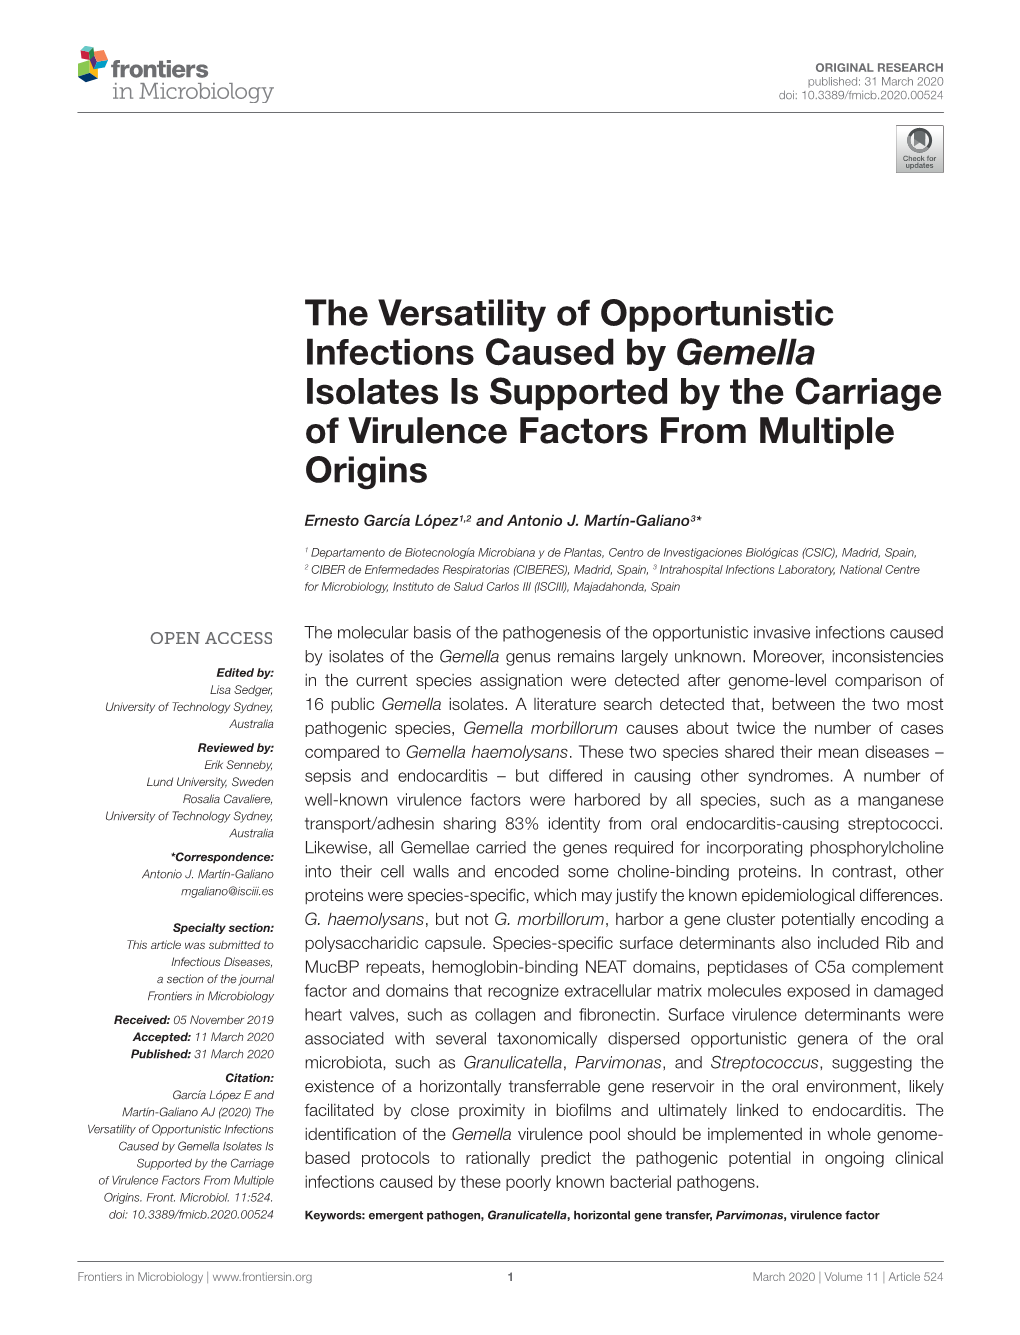 The Versatility of Opportunistic Infections Caused by Gemella Isolates Is Supported by the Carriage of Virulence Factors from Multiple Origins